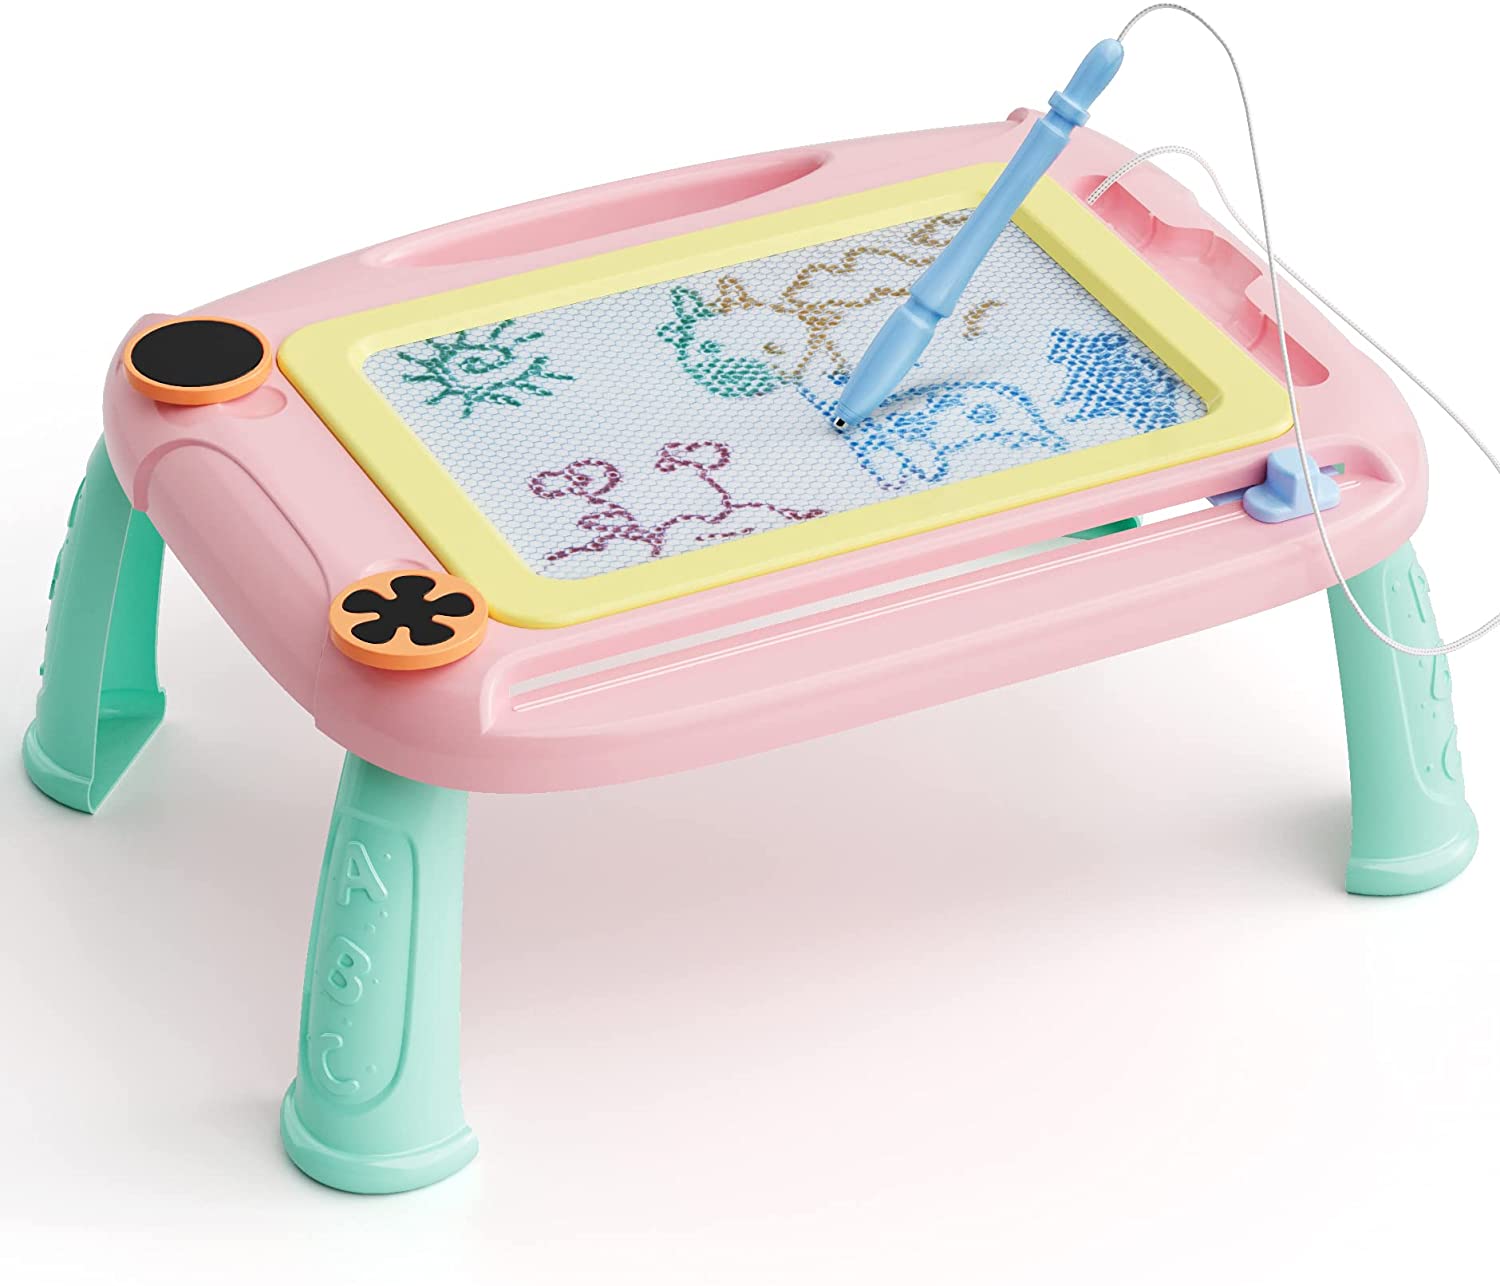 LODBY Removable Legs Doodle Table Toddler Girl Toy